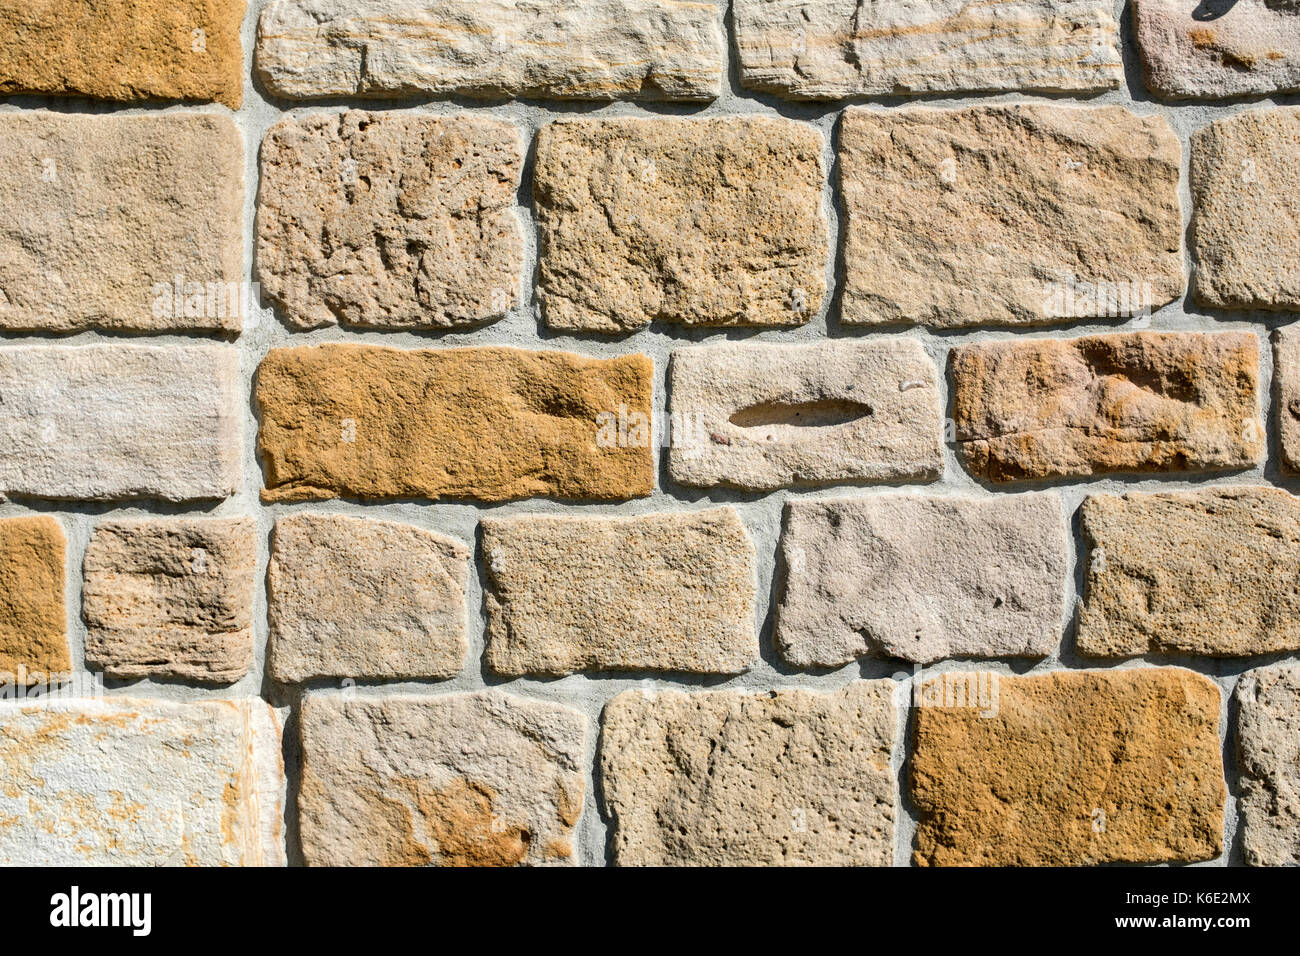 Lime stone wall Stock Photo